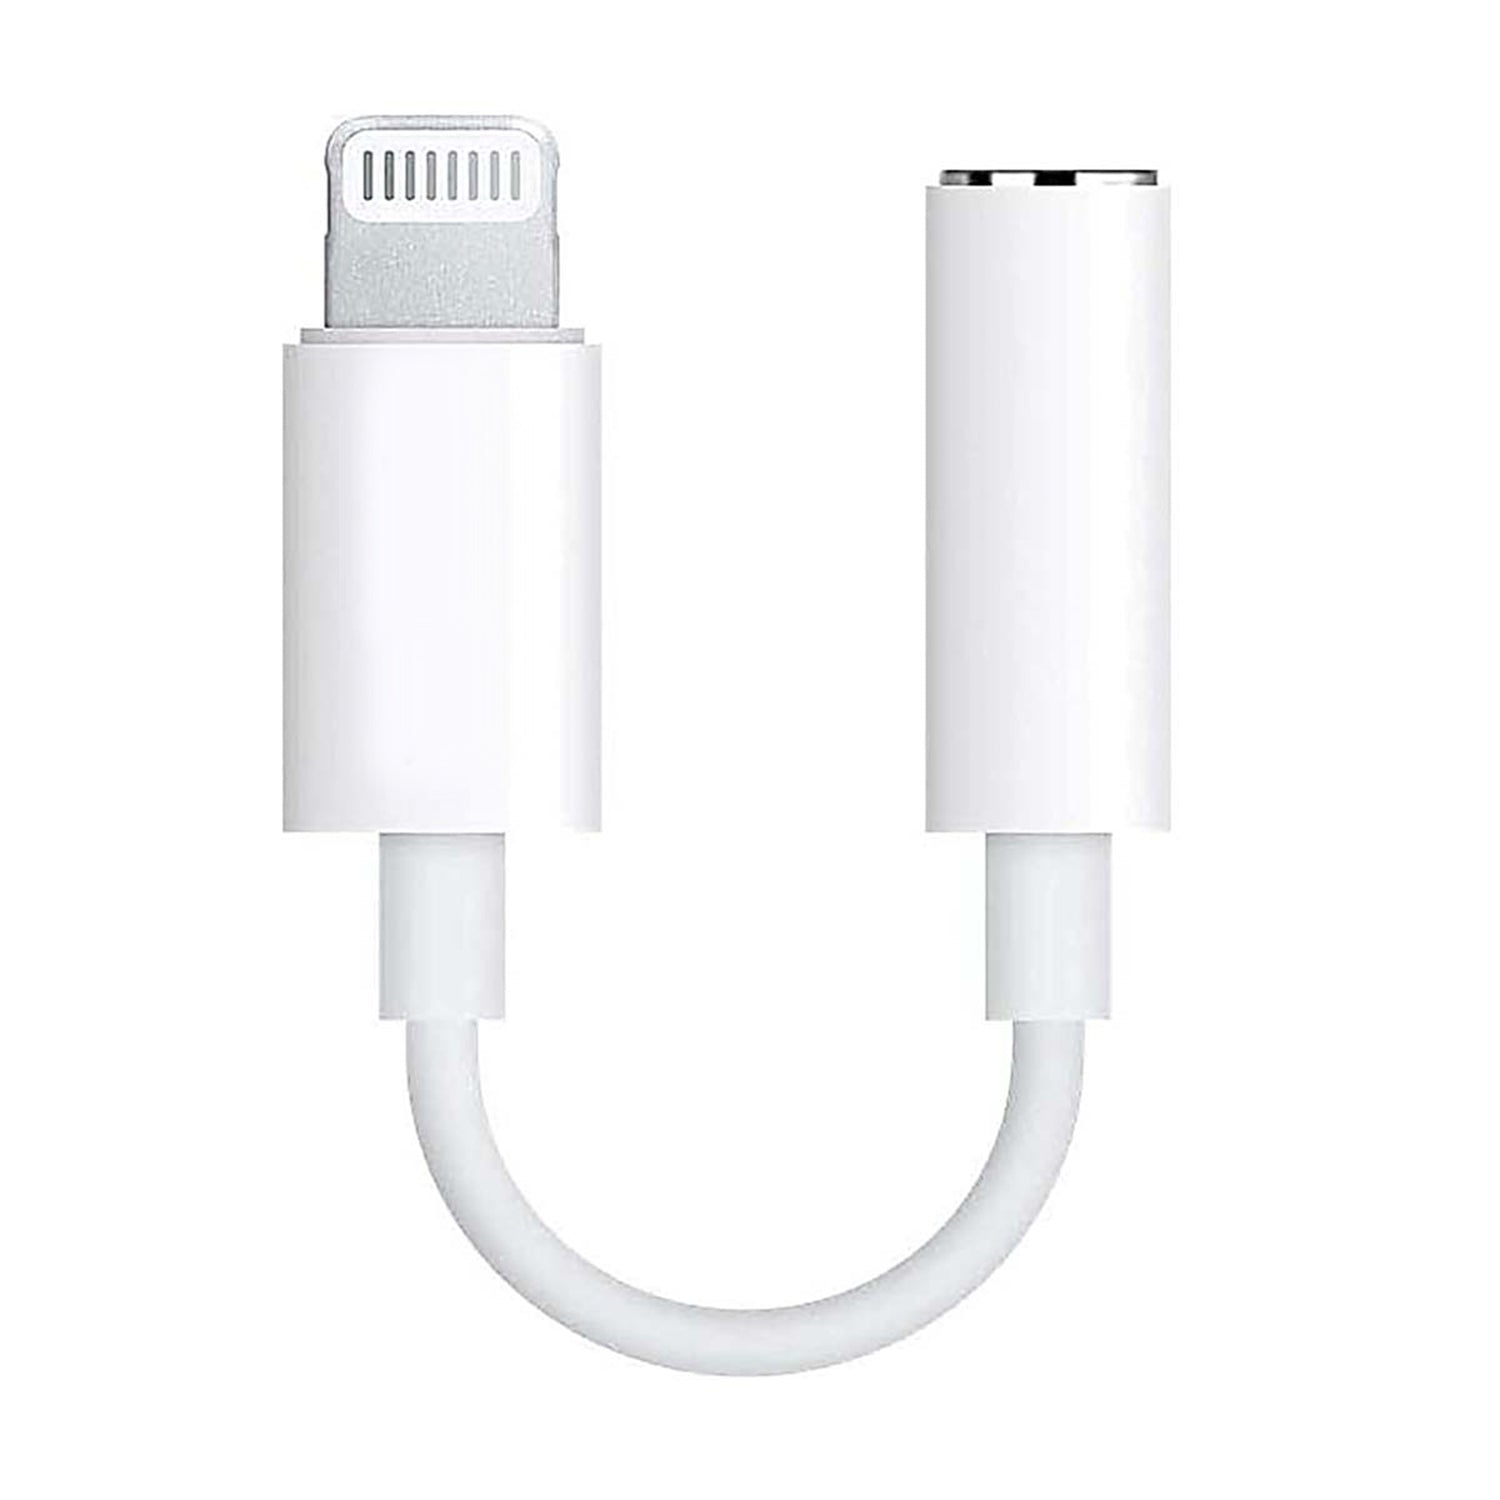 Lightning to 3.5 mm Headphone Jack Adapter, Aux Adapter for iPhone